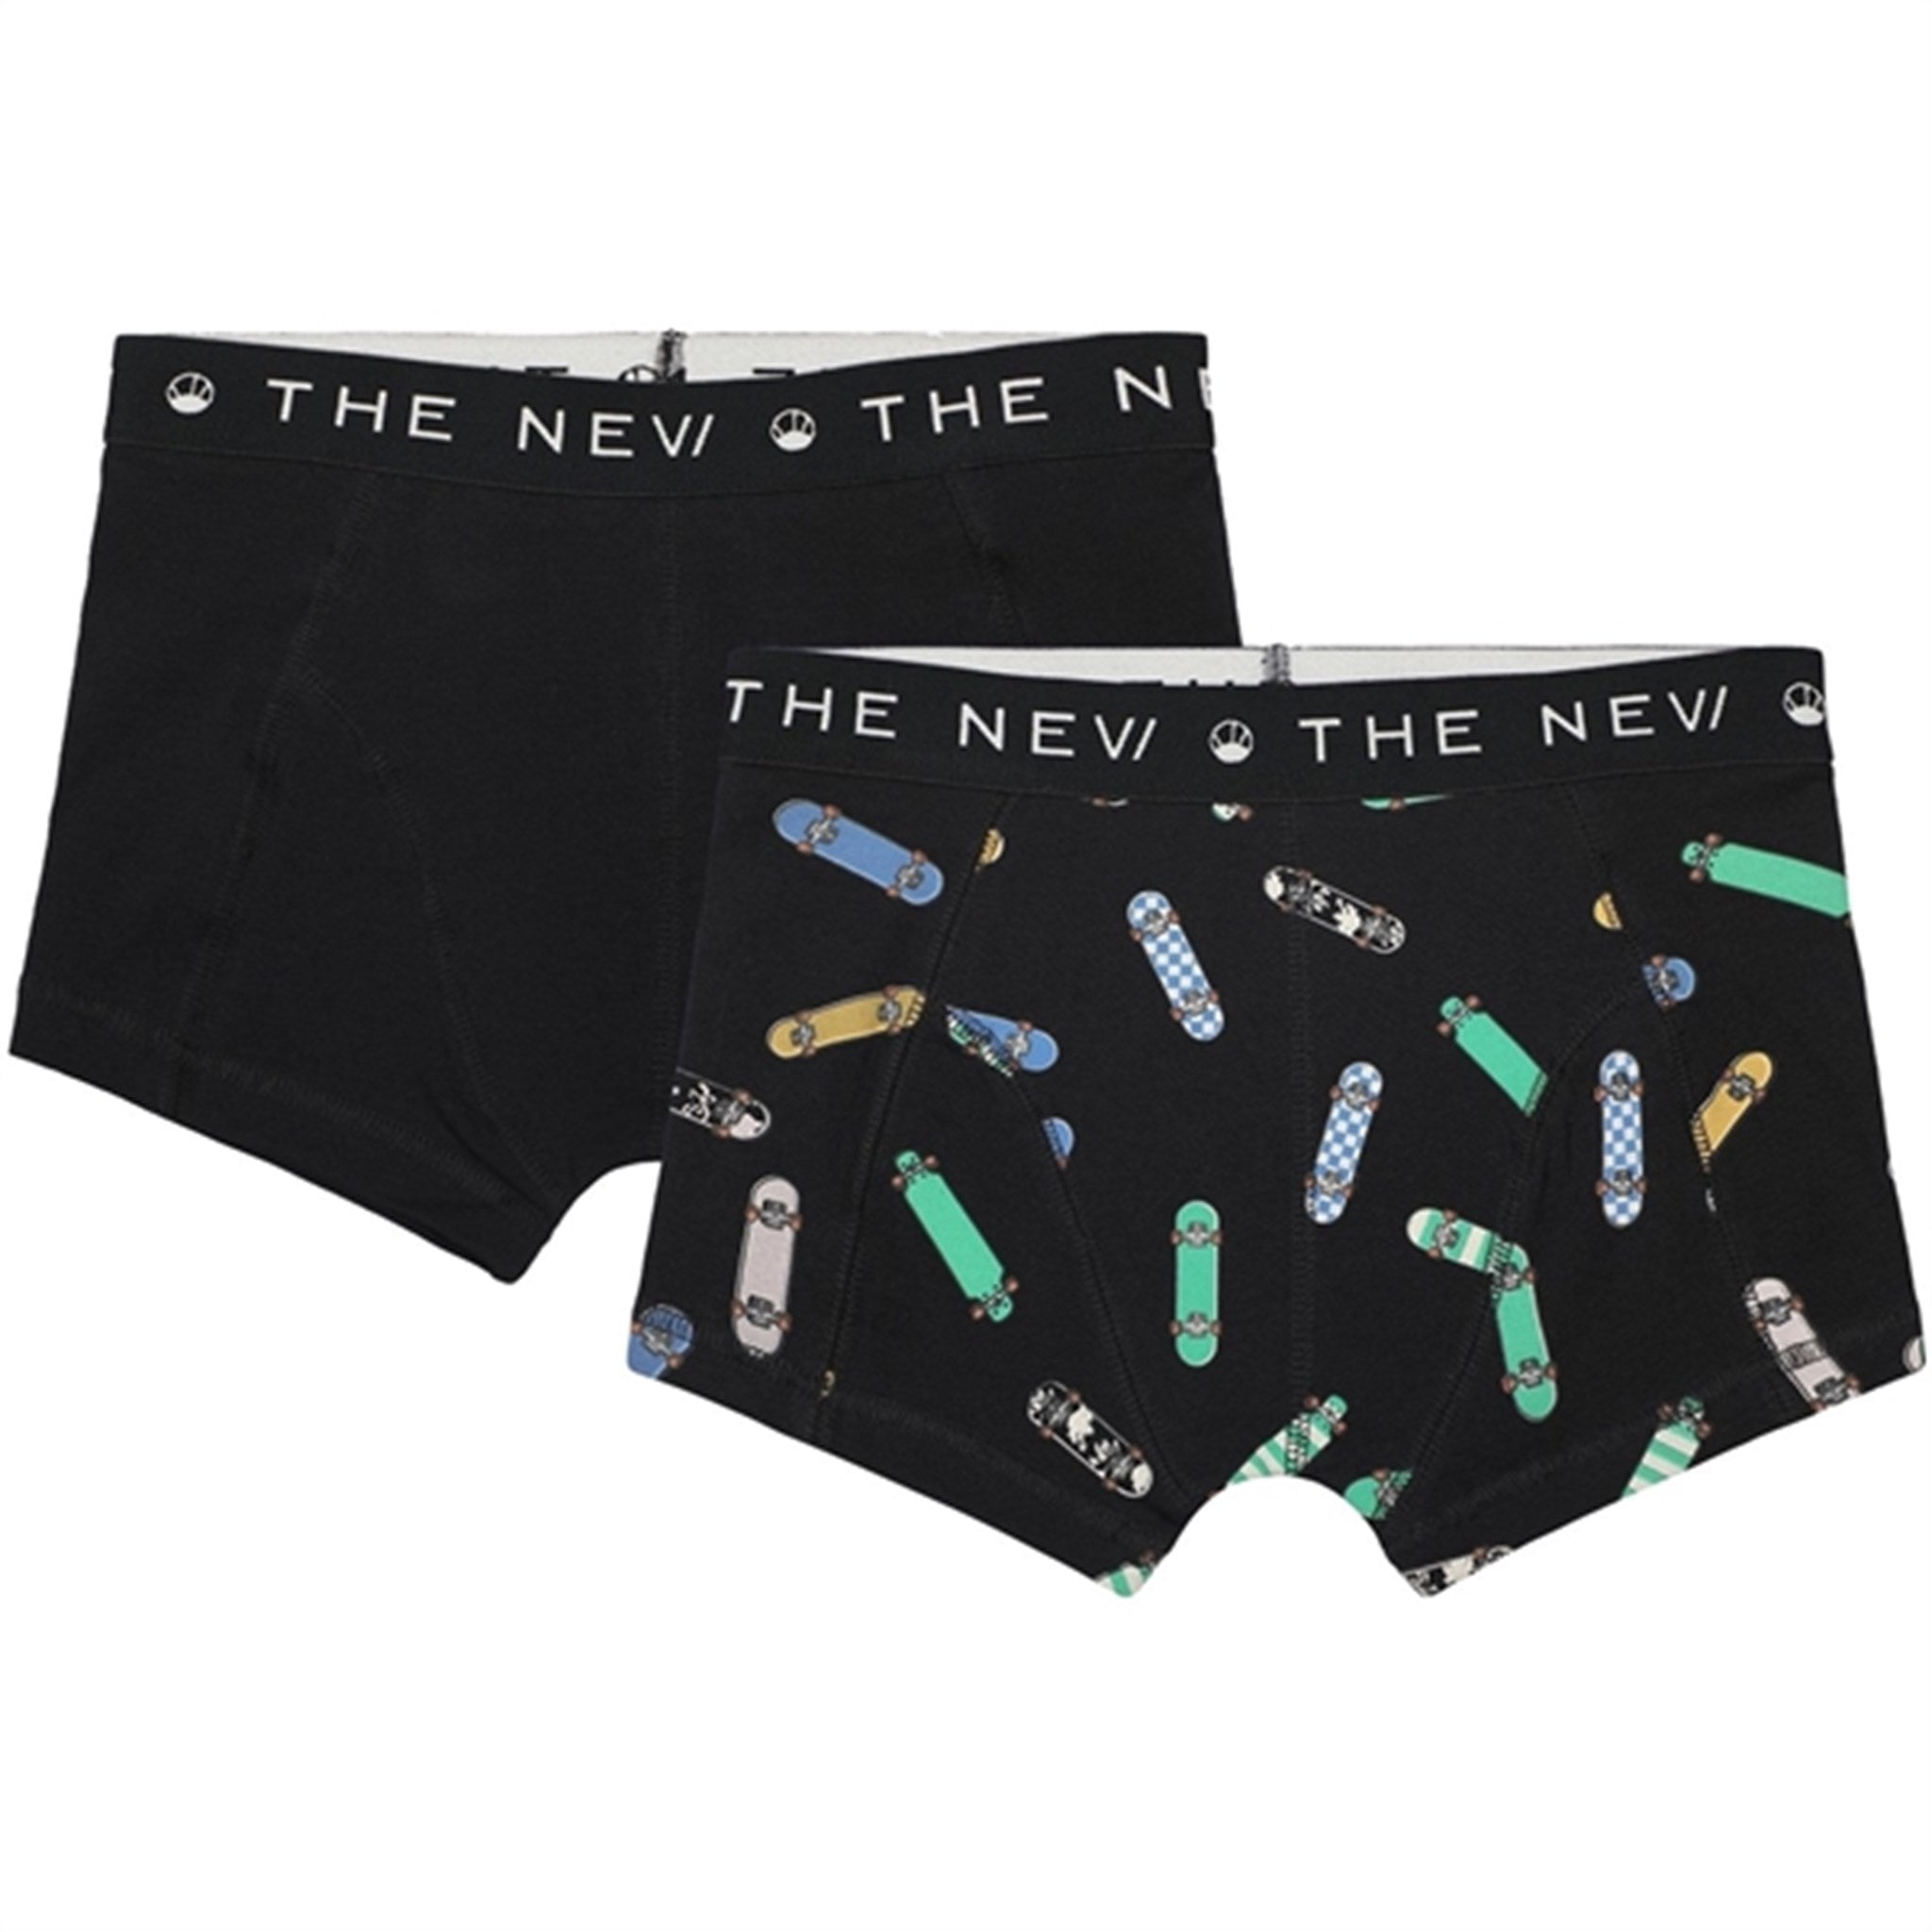 The New Black Beauty Boxers 2-Pack